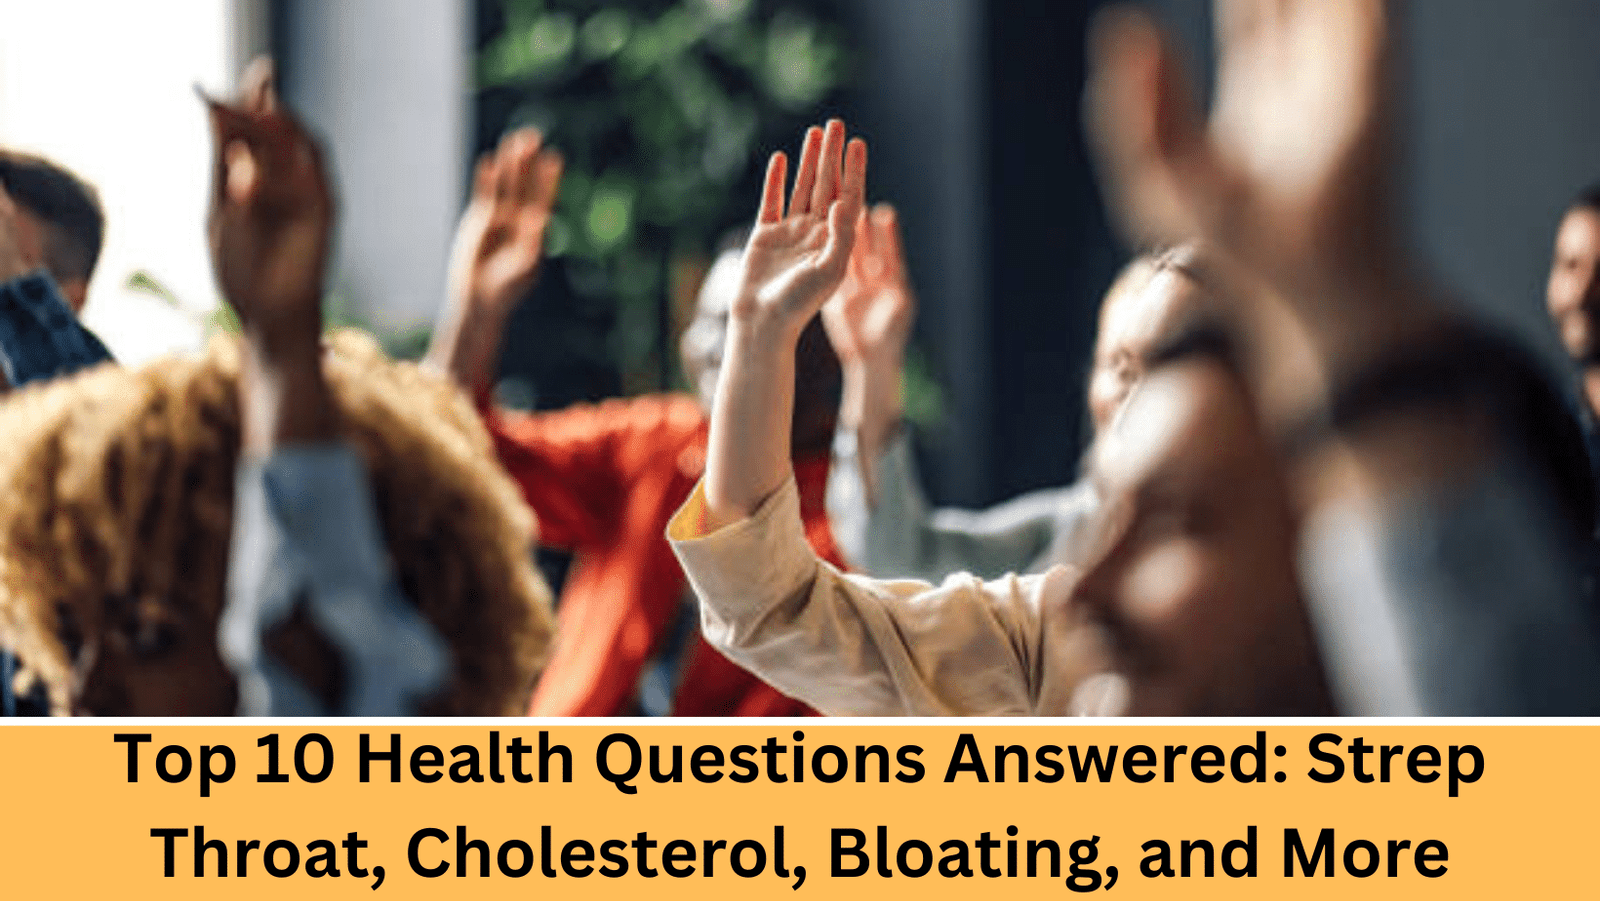 Unveiling the Top 10 Health Questions. Credit- Gettyimages